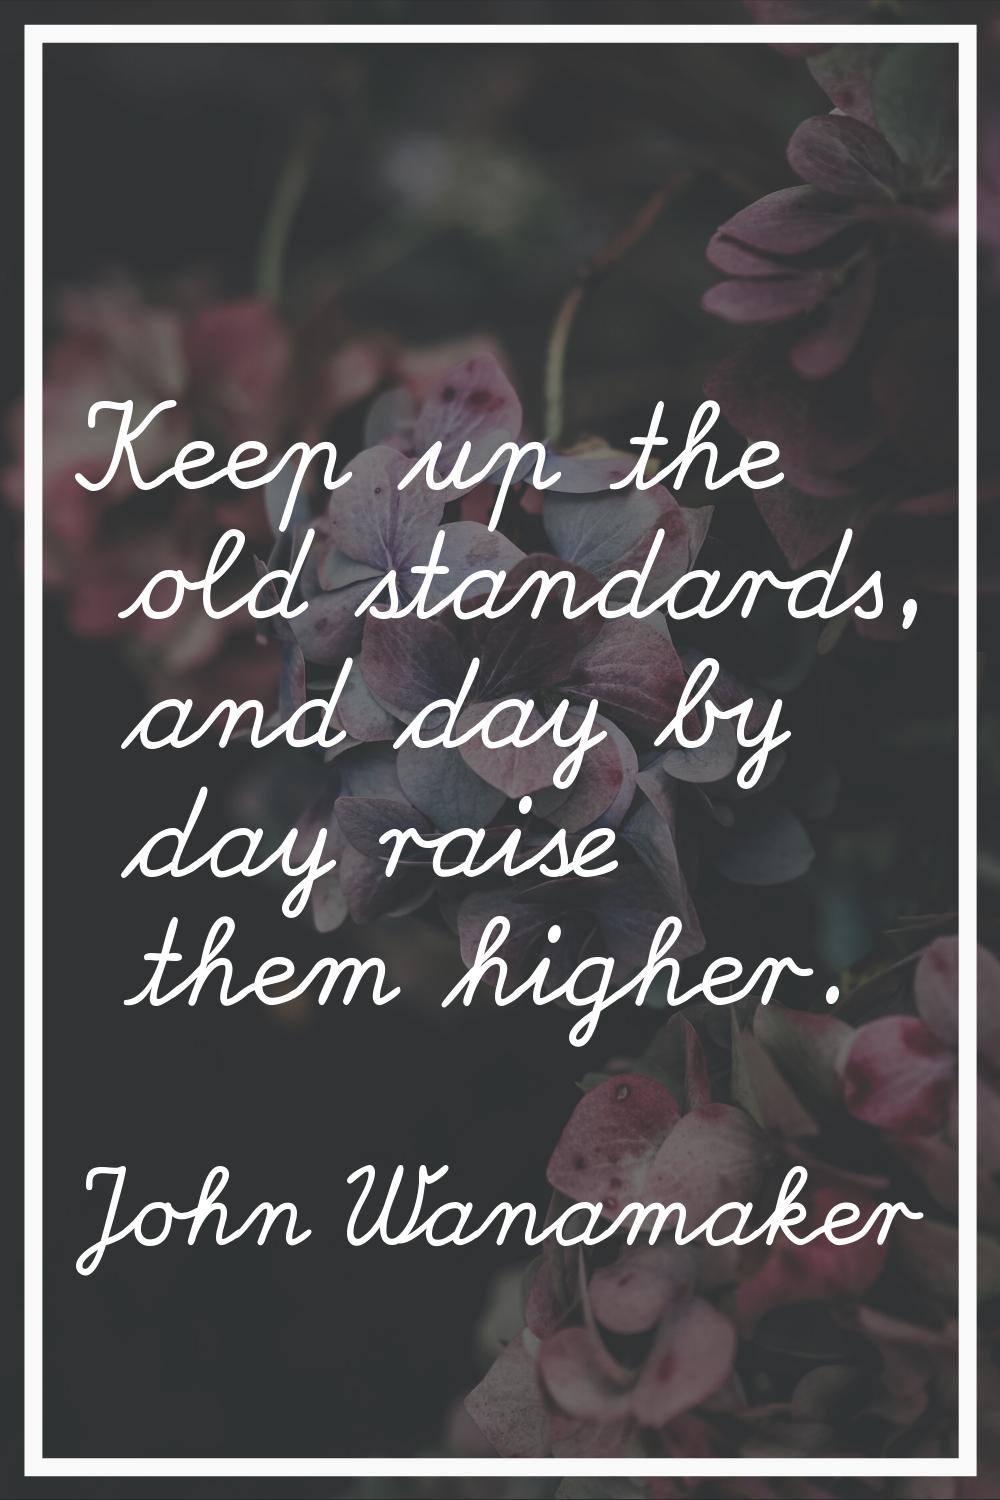 Keep up the old standards, and day by day raise them higher.